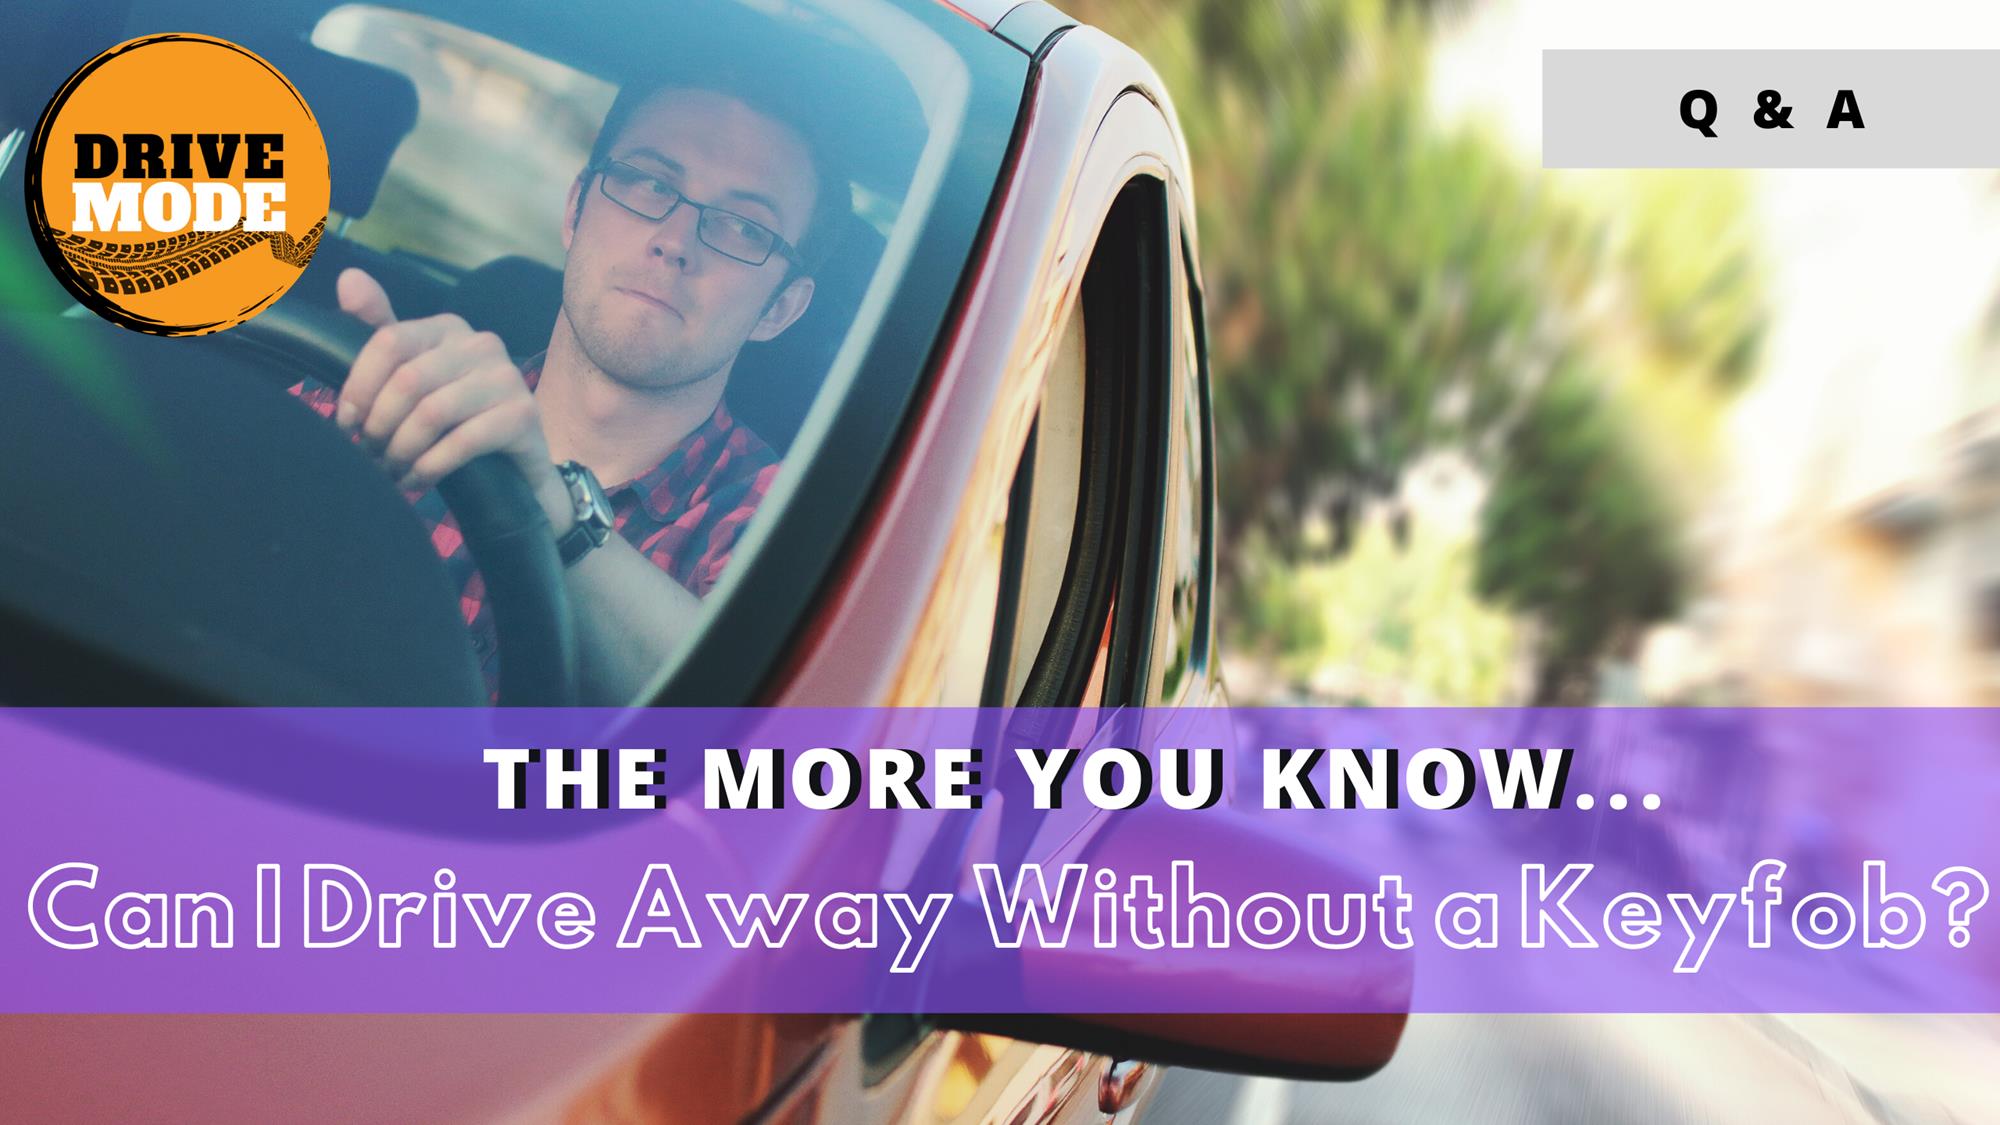 Q&A: Can I Drive Away Without a Keyfob?